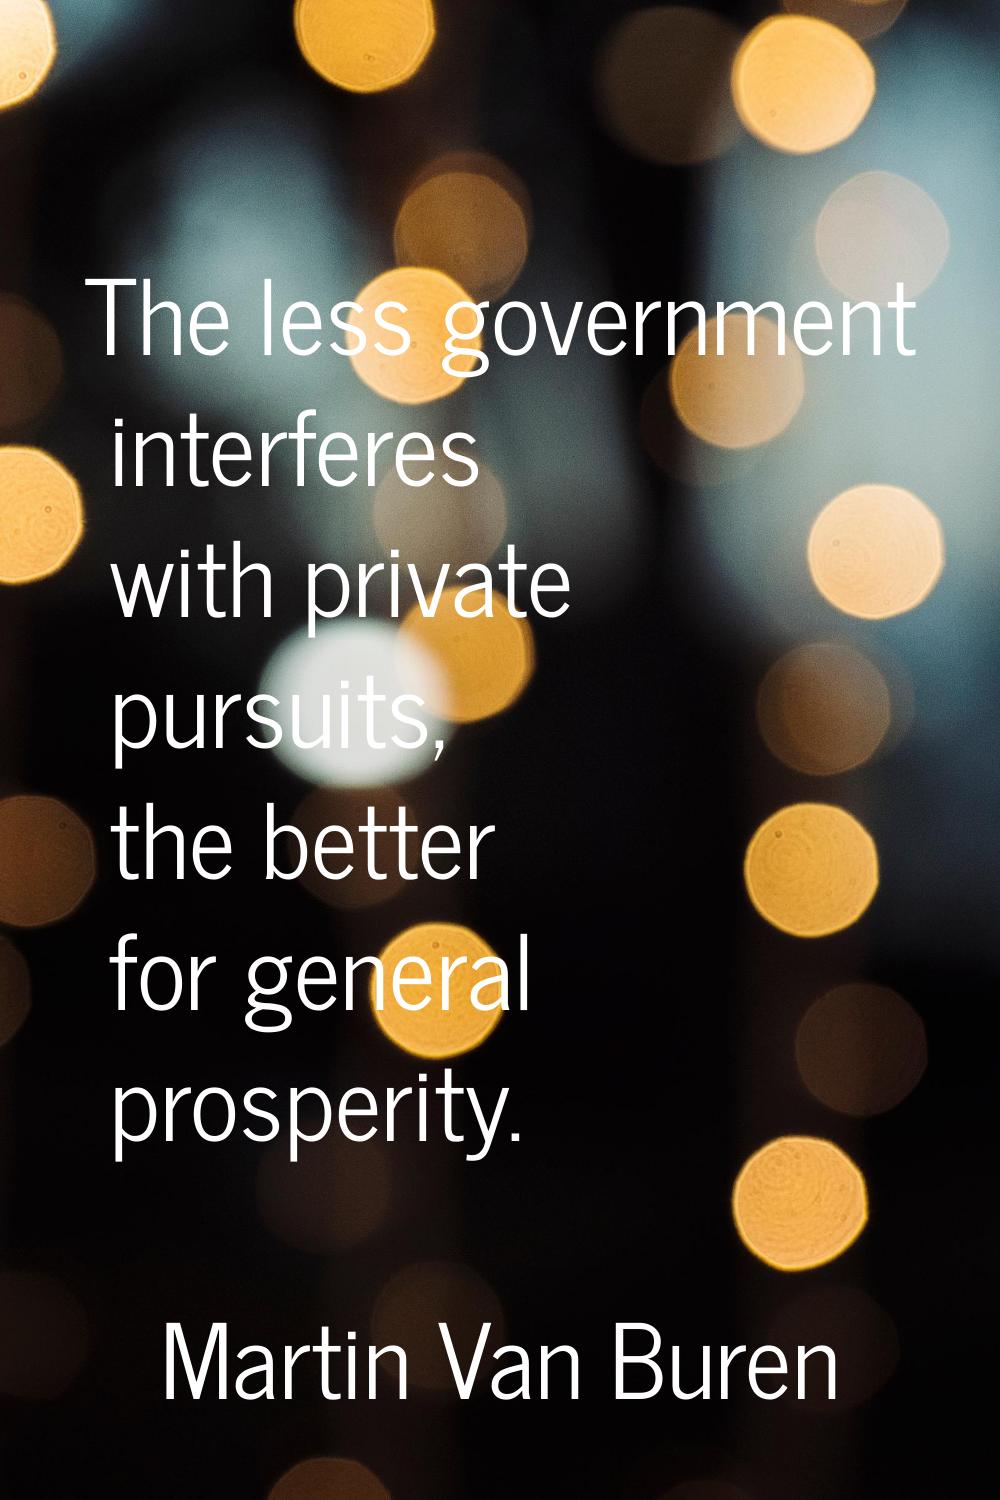 The less government interferes with private pursuits, the better for general prosperity.